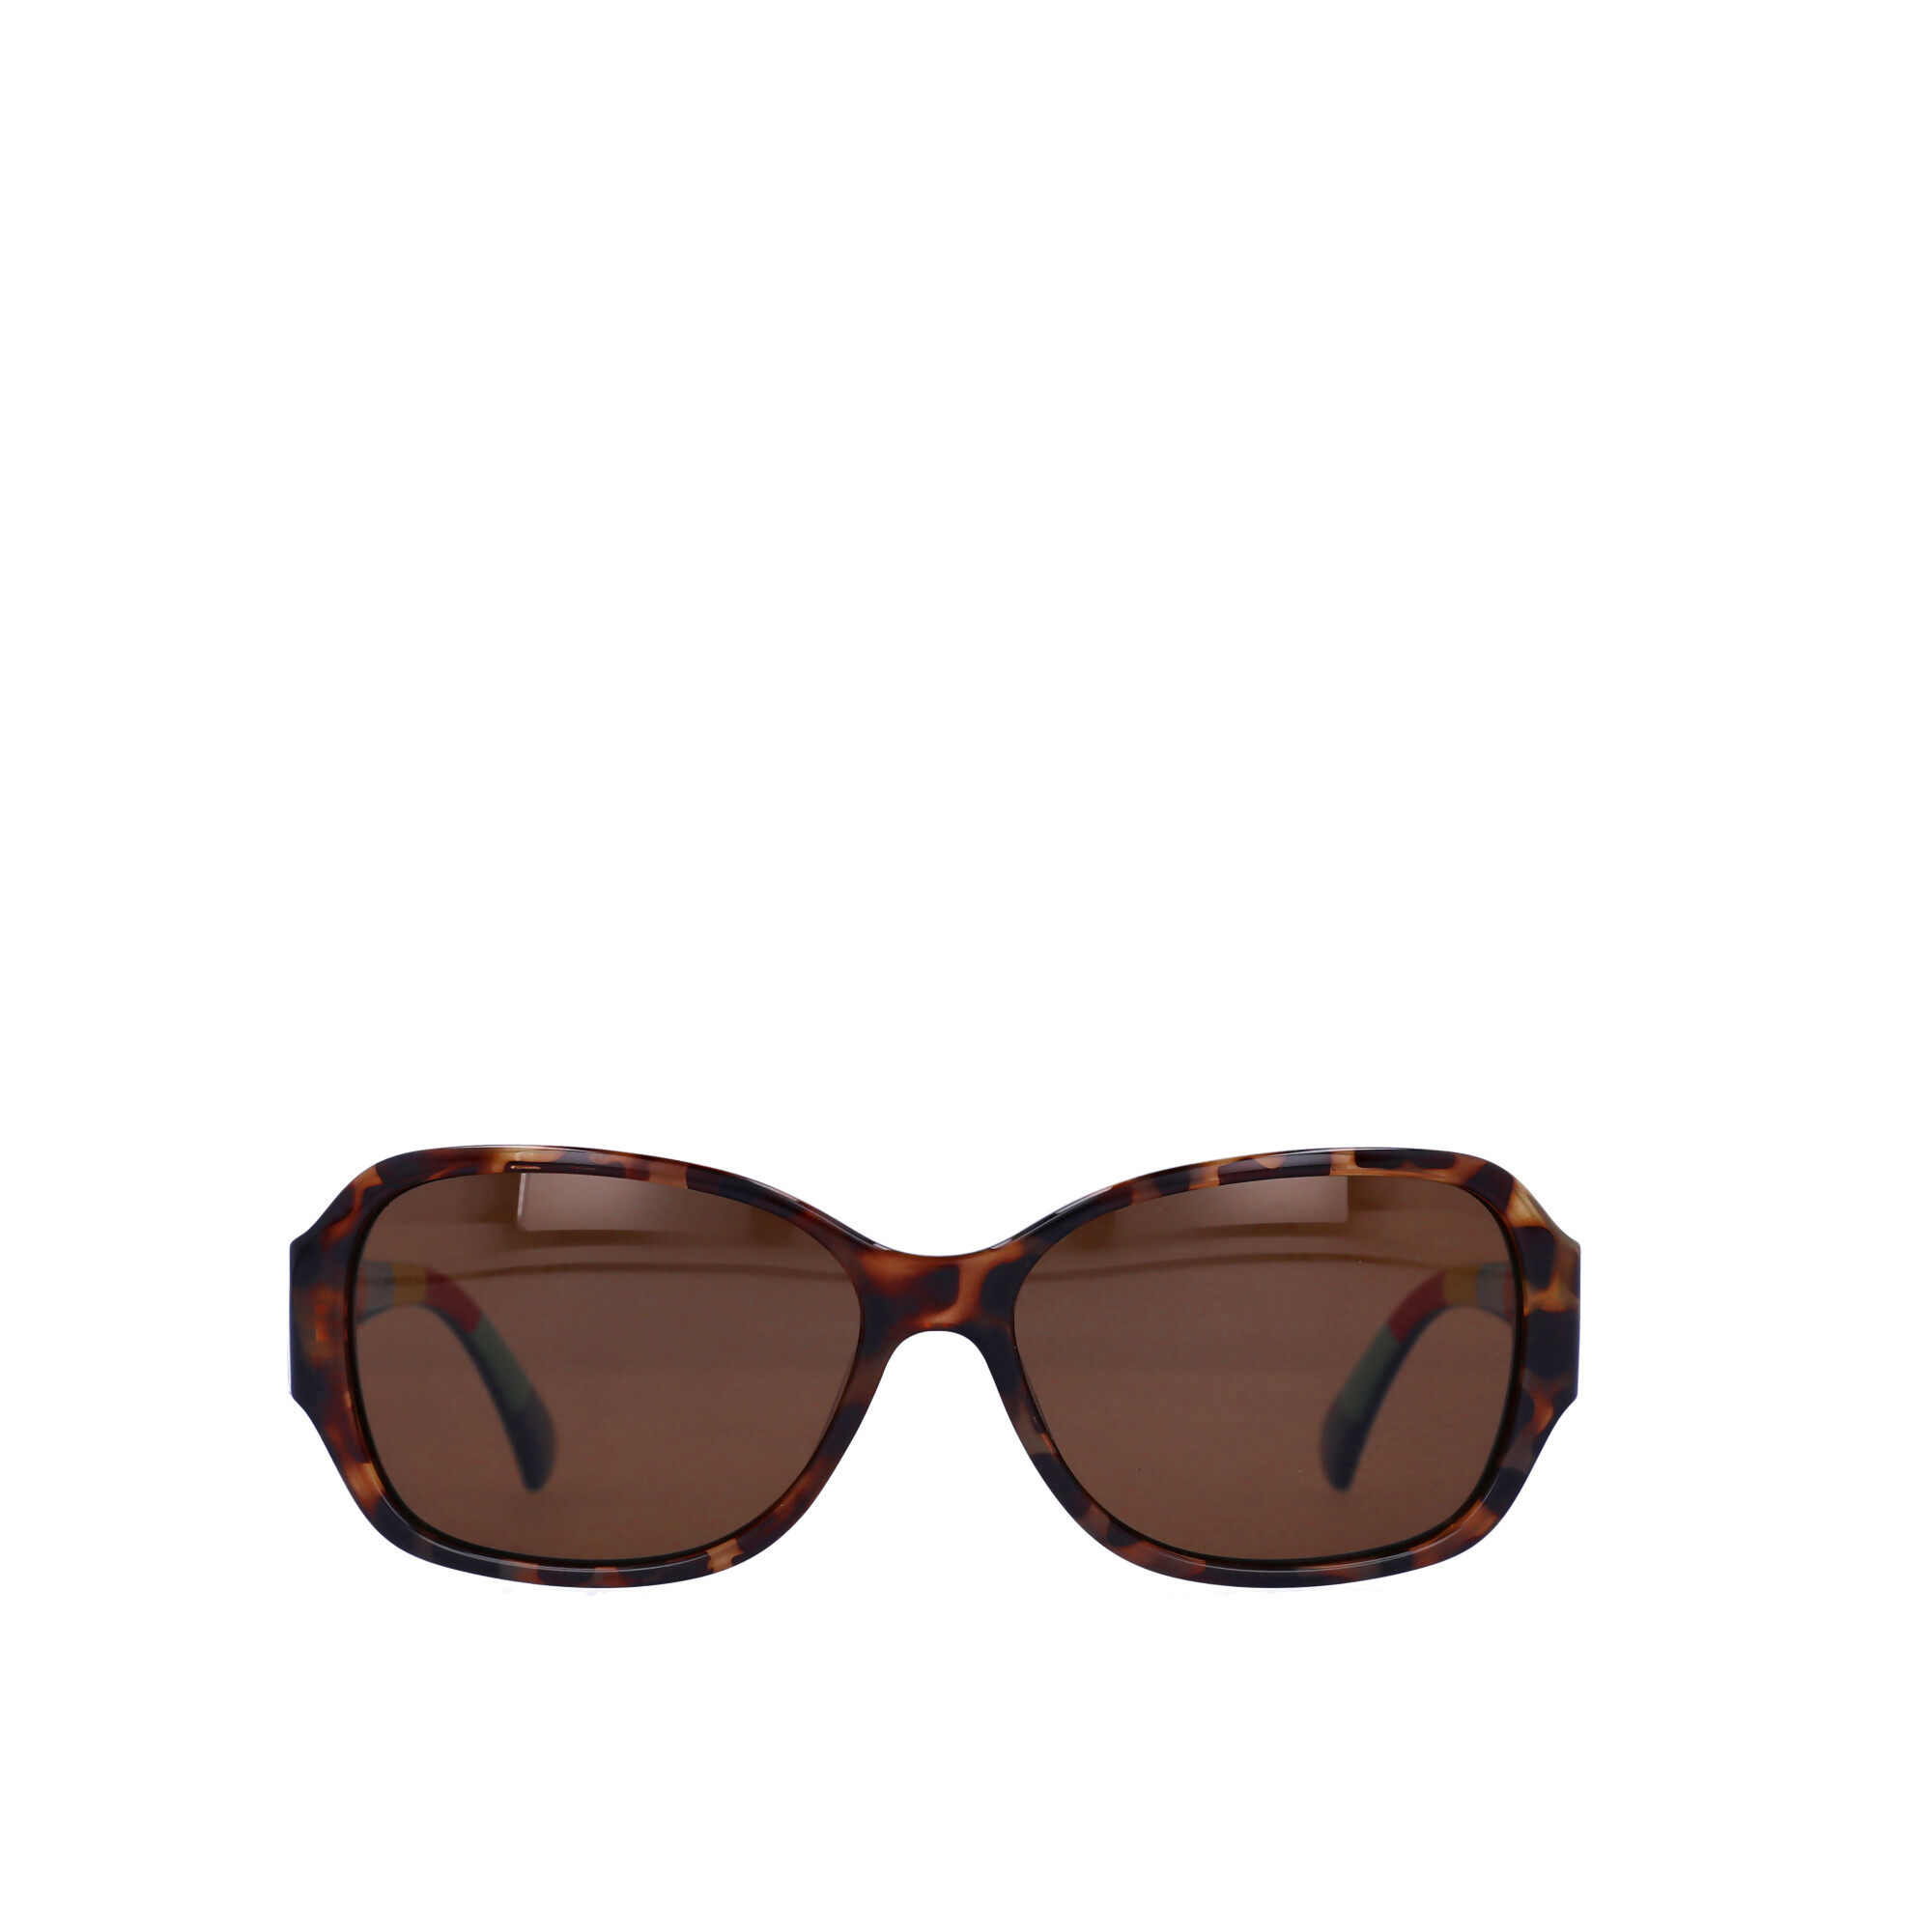 Hard Candy Womens Rx'able Sunglasses, Hs14, Tortoise Patterned, 57-15-138, with Case - image 5 of 13